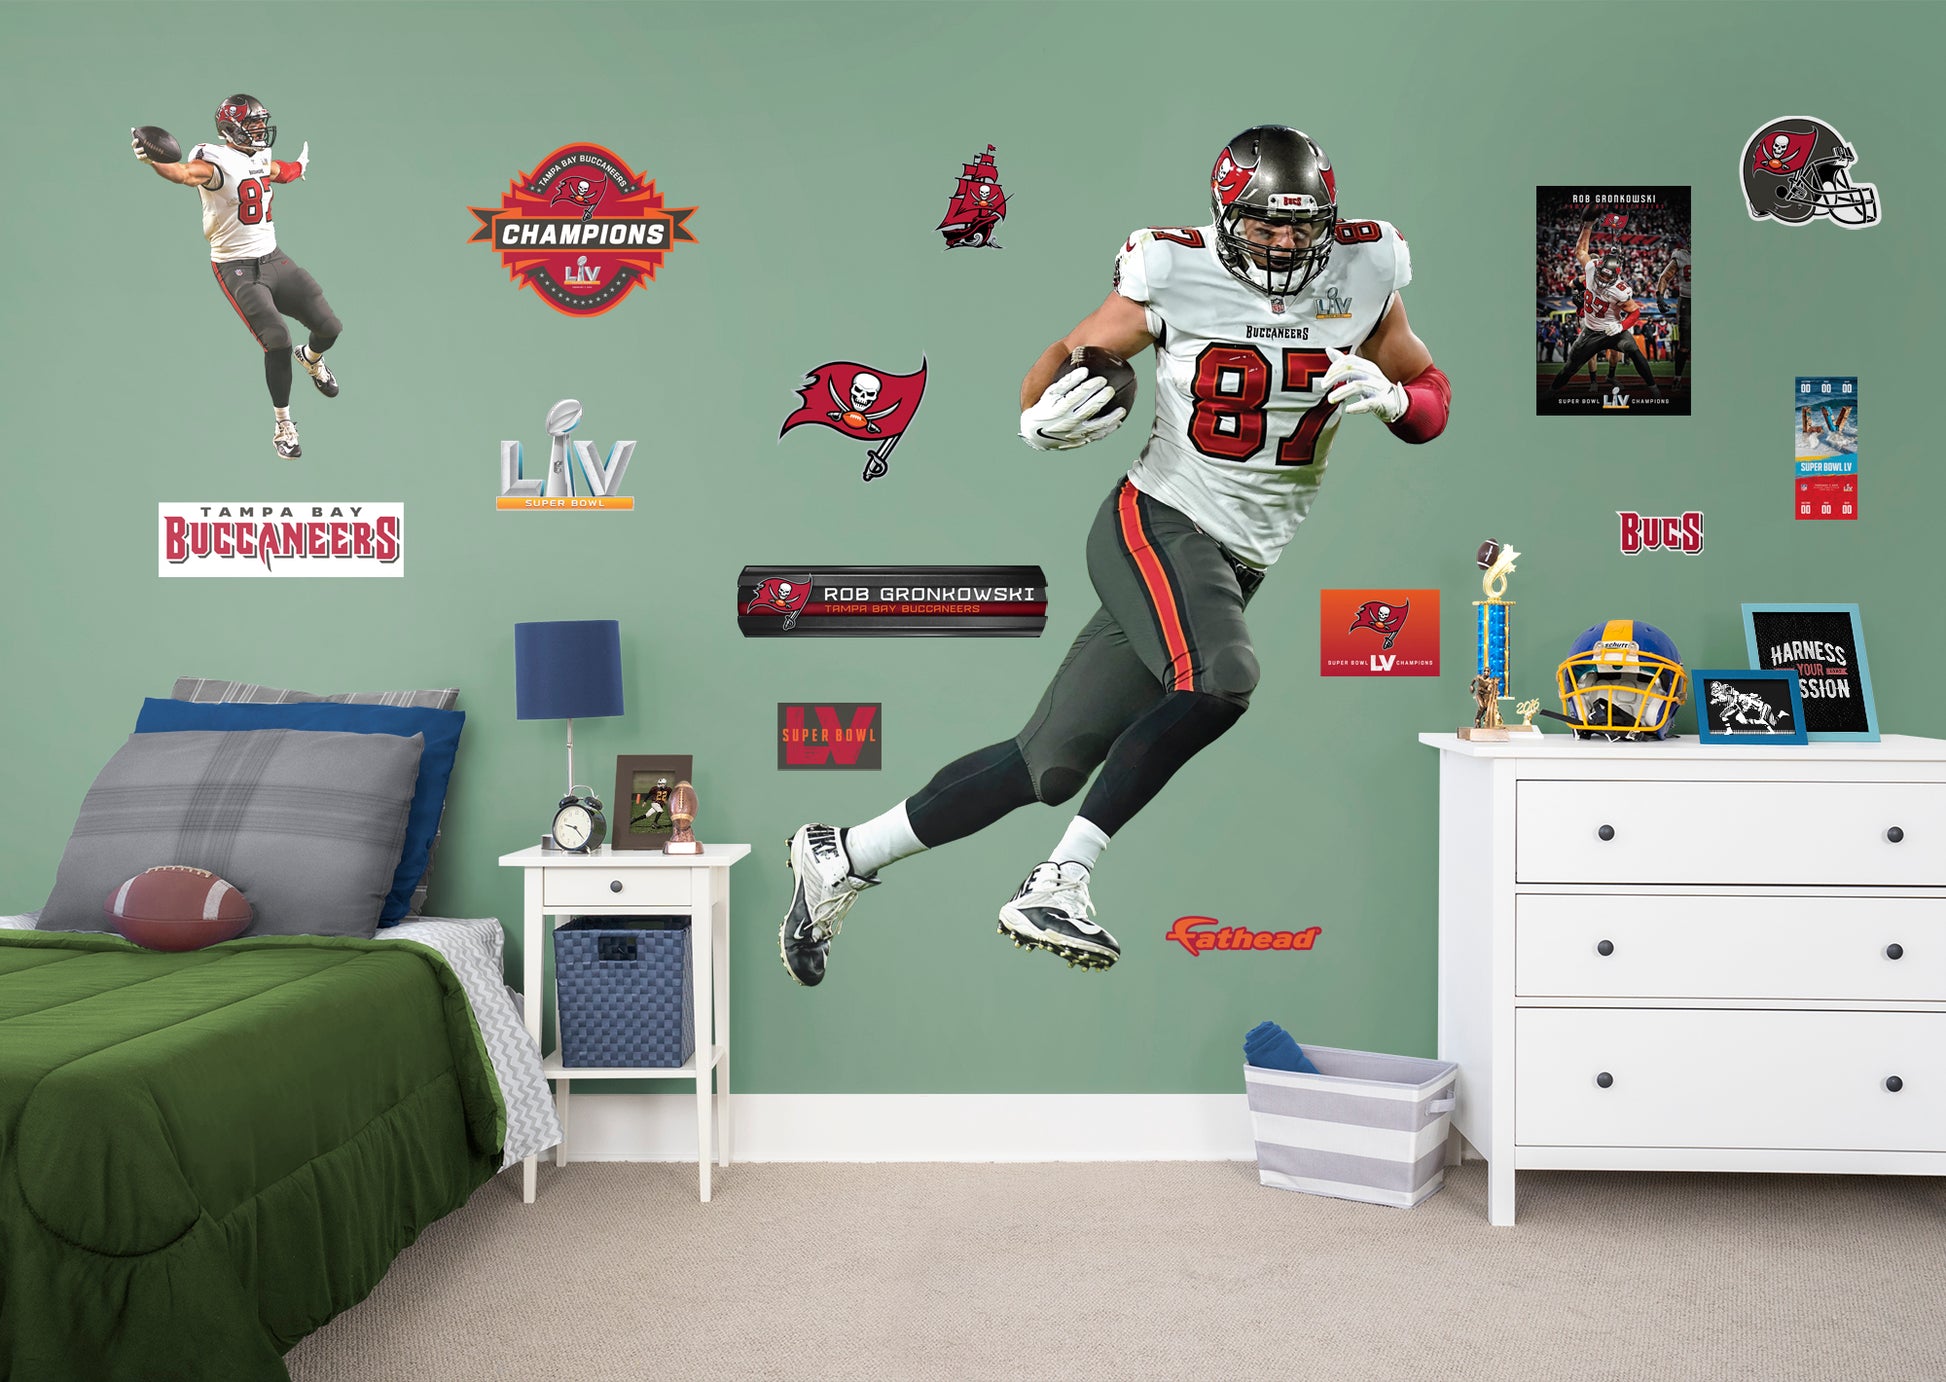 Rob Gronkowski Super Bowl LV for Tampa Bay Buccaneers - NFL Removable Wall Decal Life-Size Athlete + 14 Wall Decals 51W x 78H